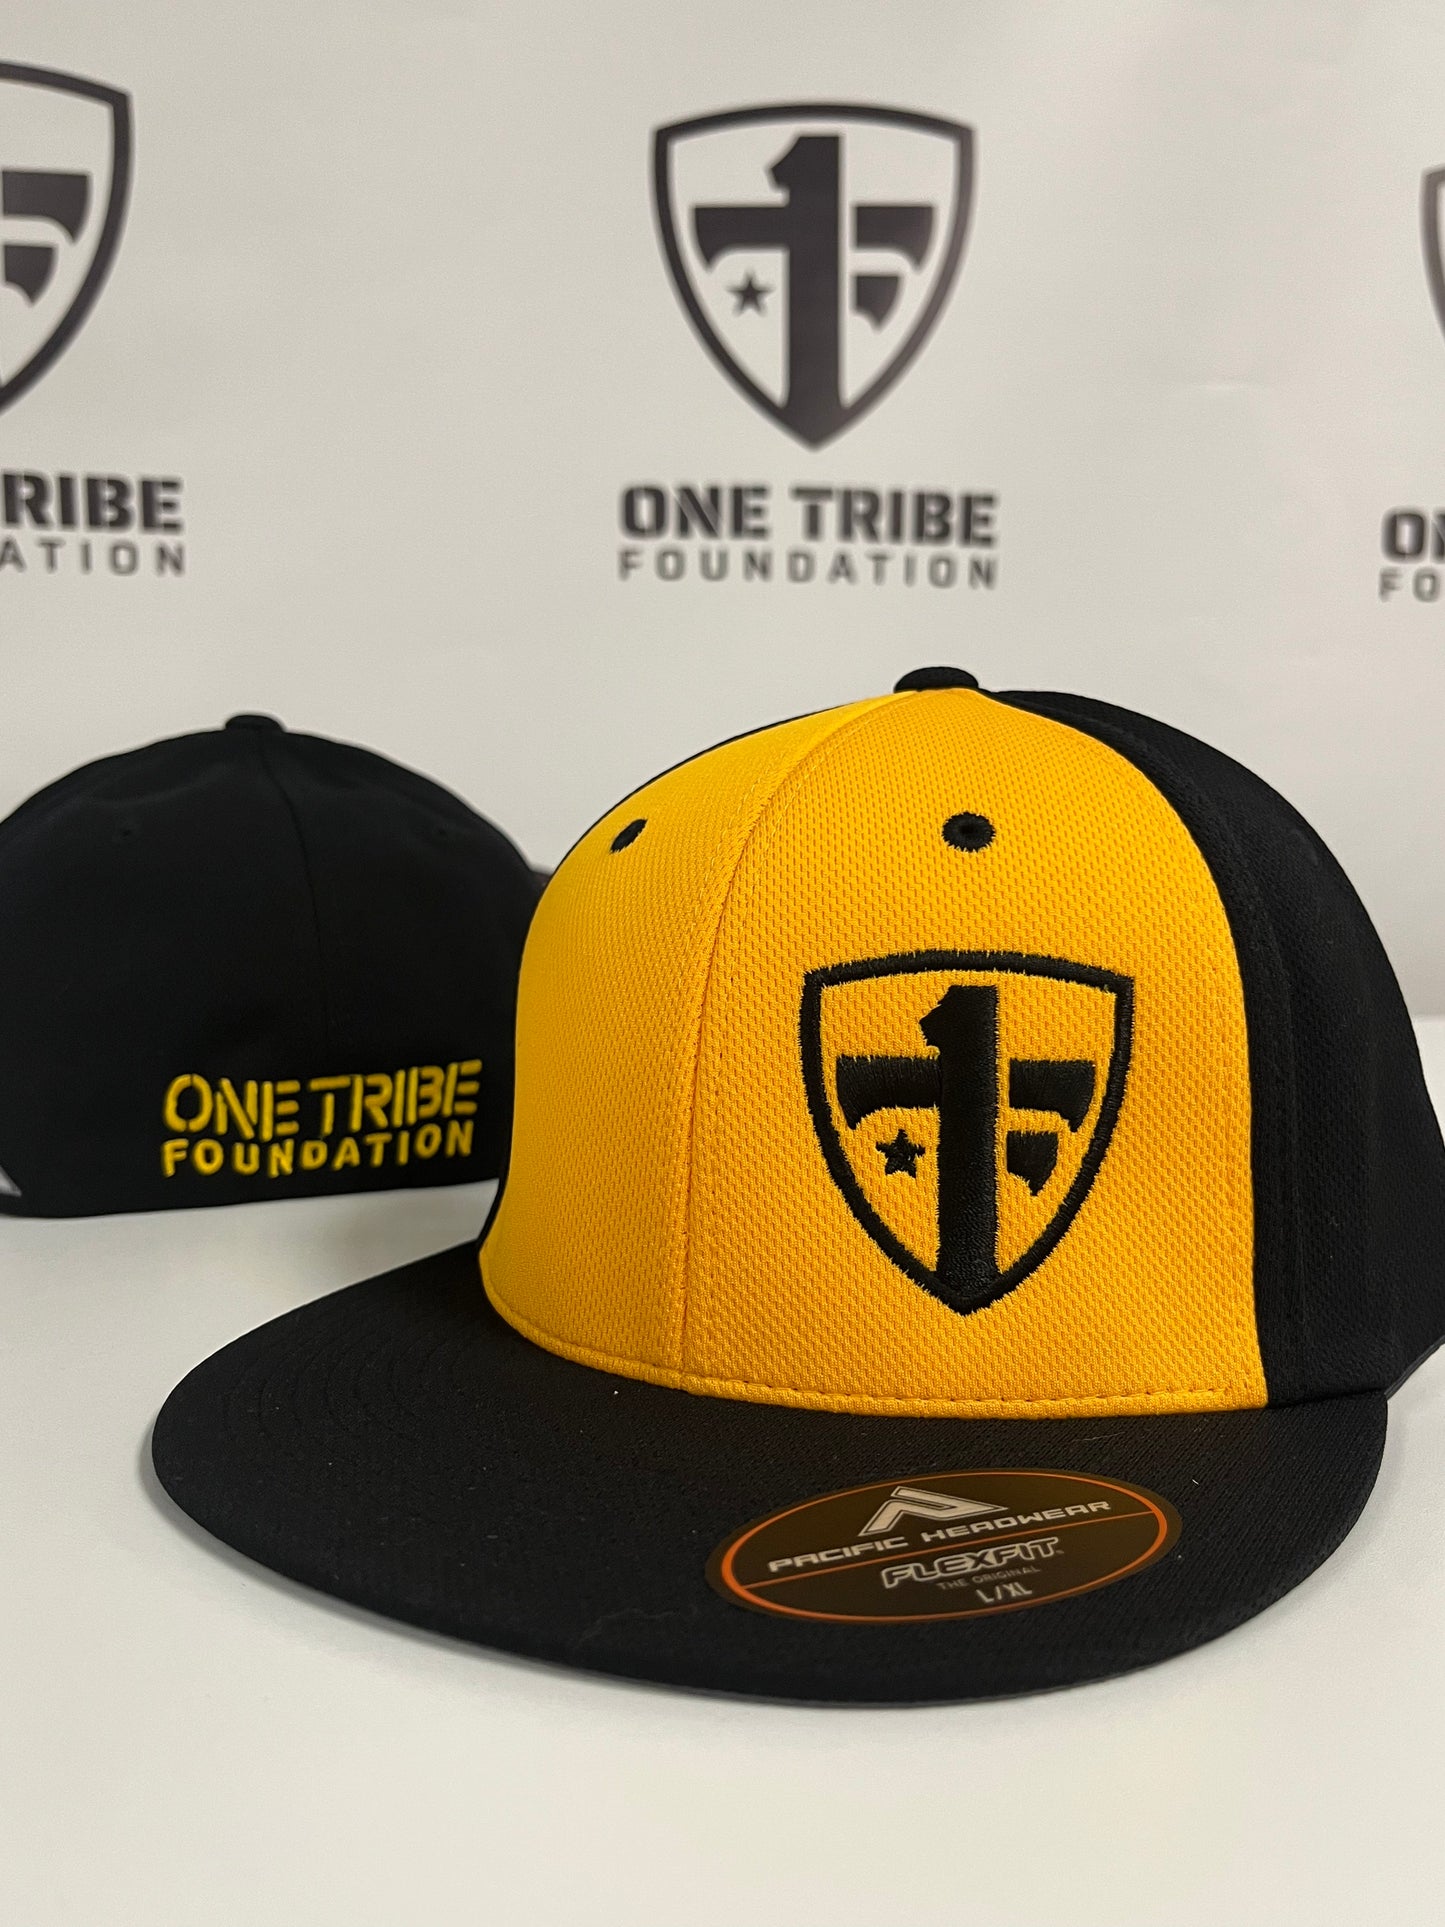 One Tribe Foundation black and gold hat.